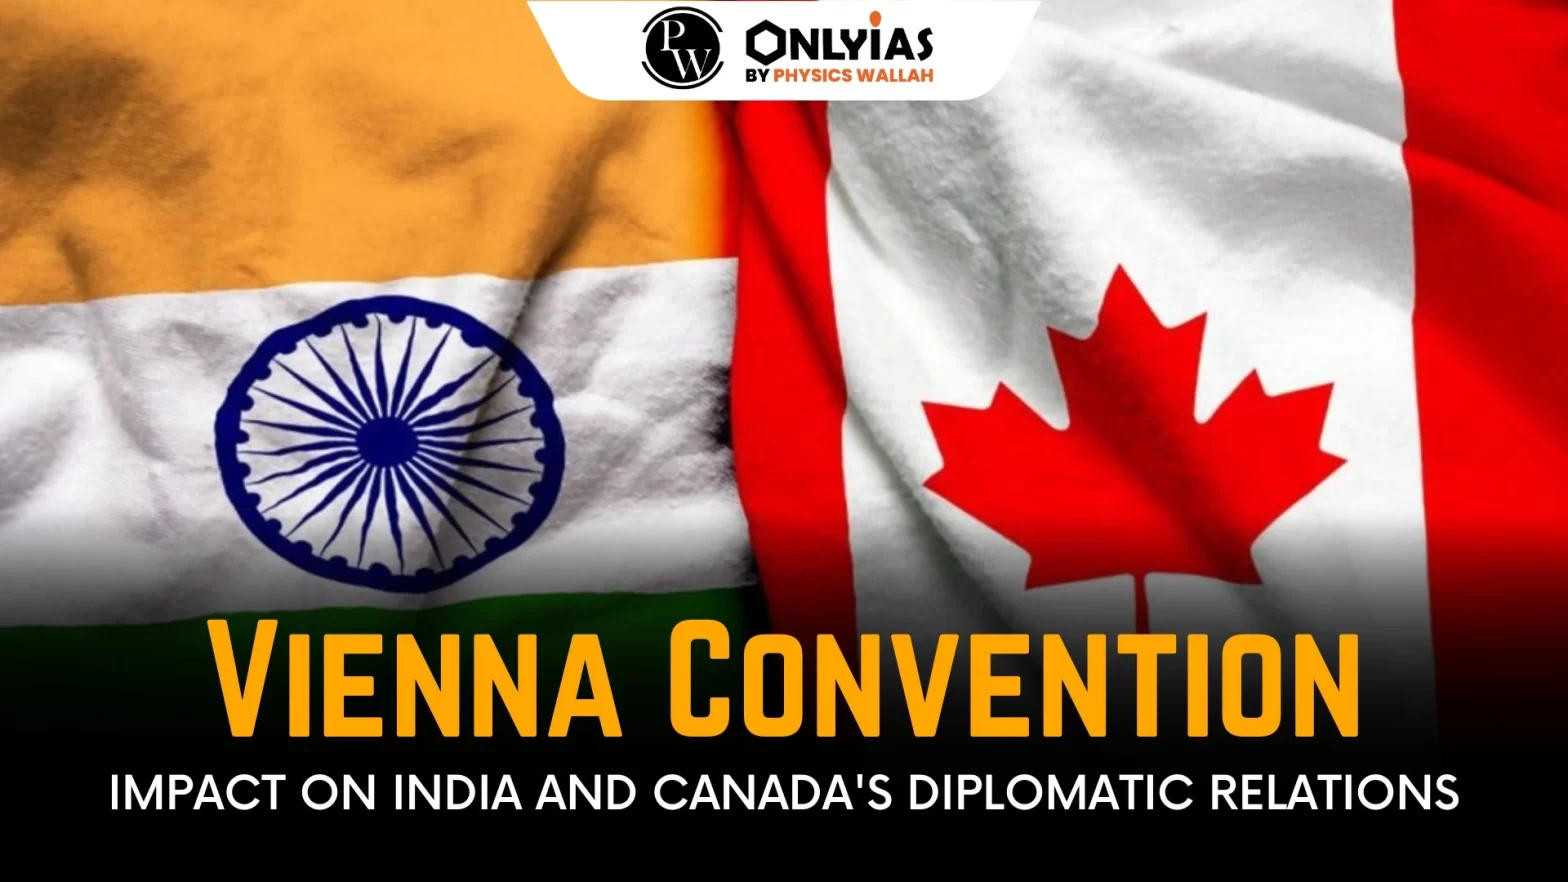 Vienna Convention: Impact on India and Canada’s Diplomatic Relations